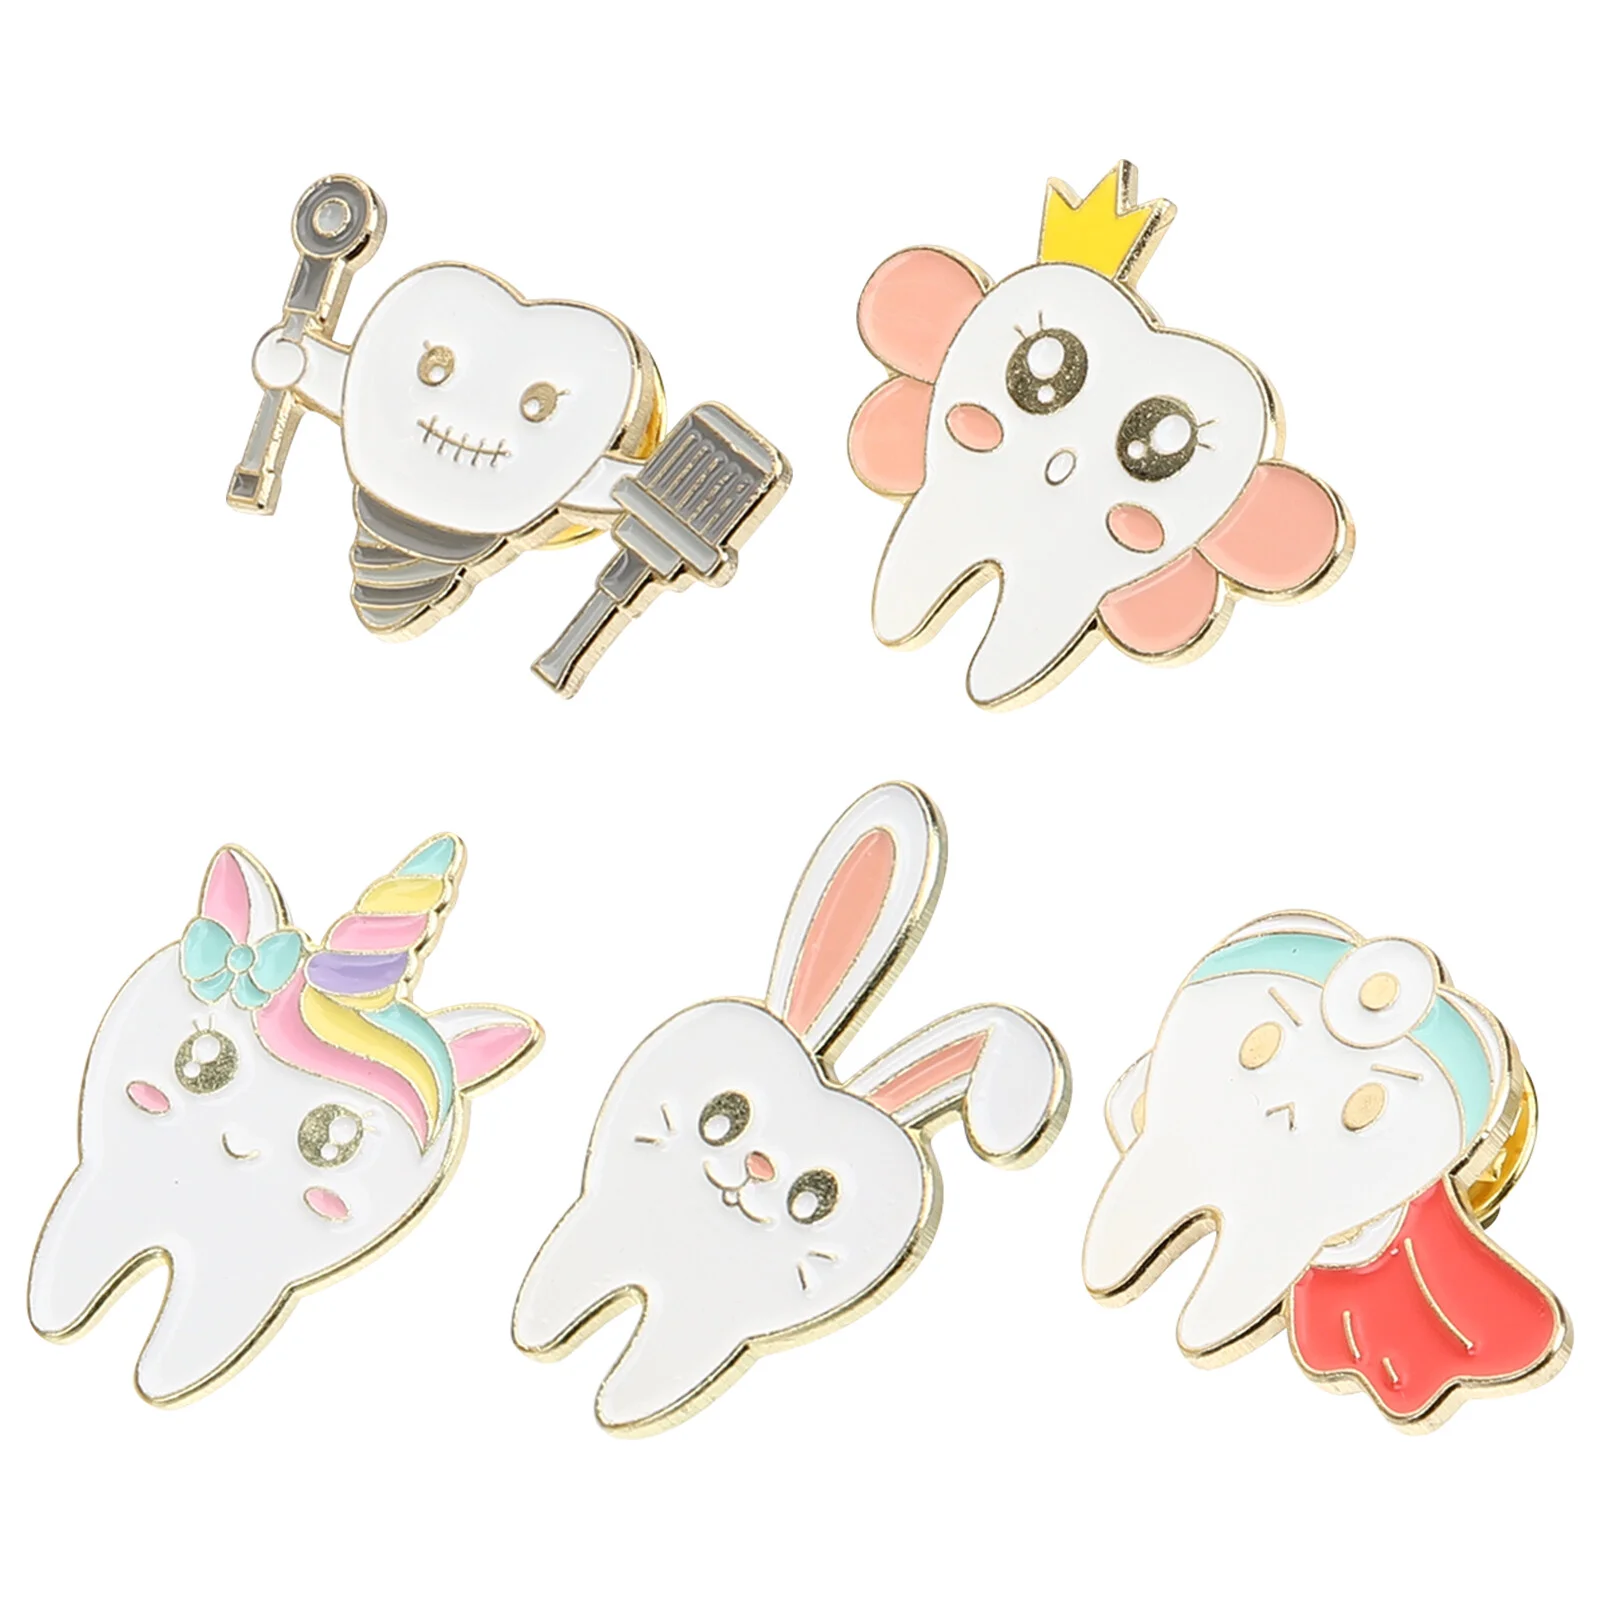 

5 Pcs Tooth Brooch Clothes Pin Costume Bonnet Fine Brooches Scarf Metal Alloy Miss Shawl